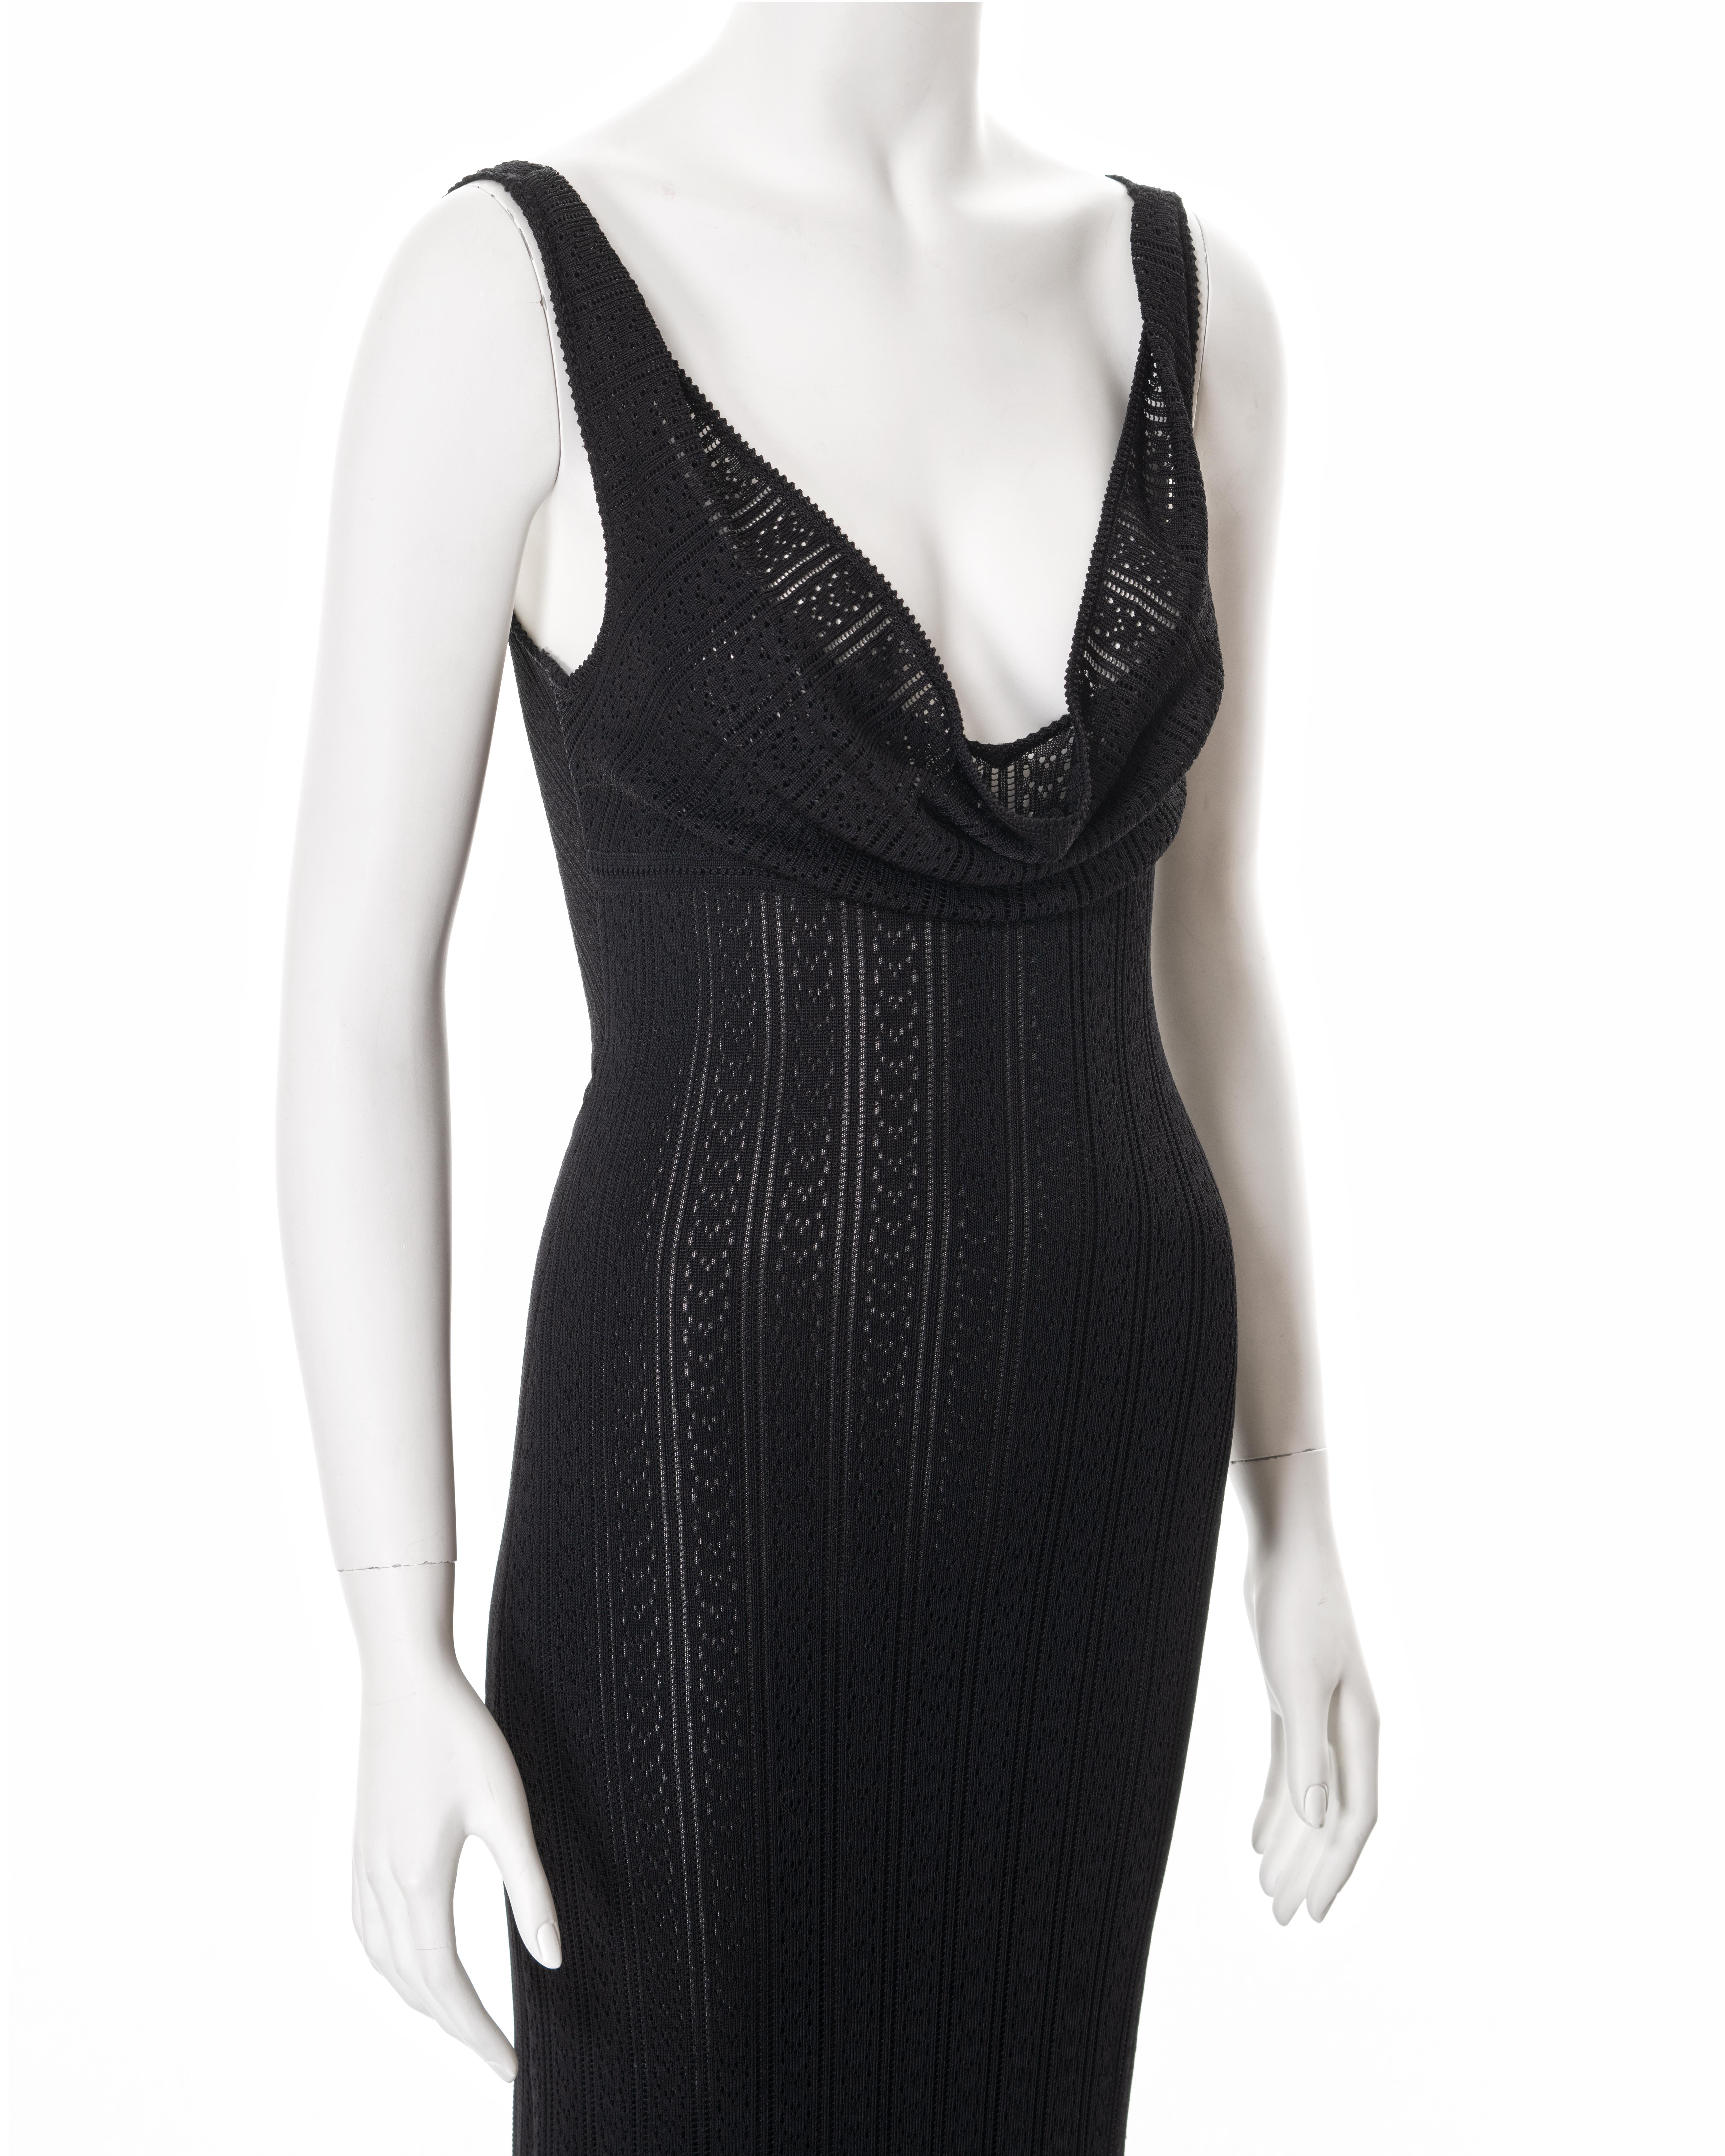 John Galliano black knitted lace evening dress, ss 1998 For Sale 2